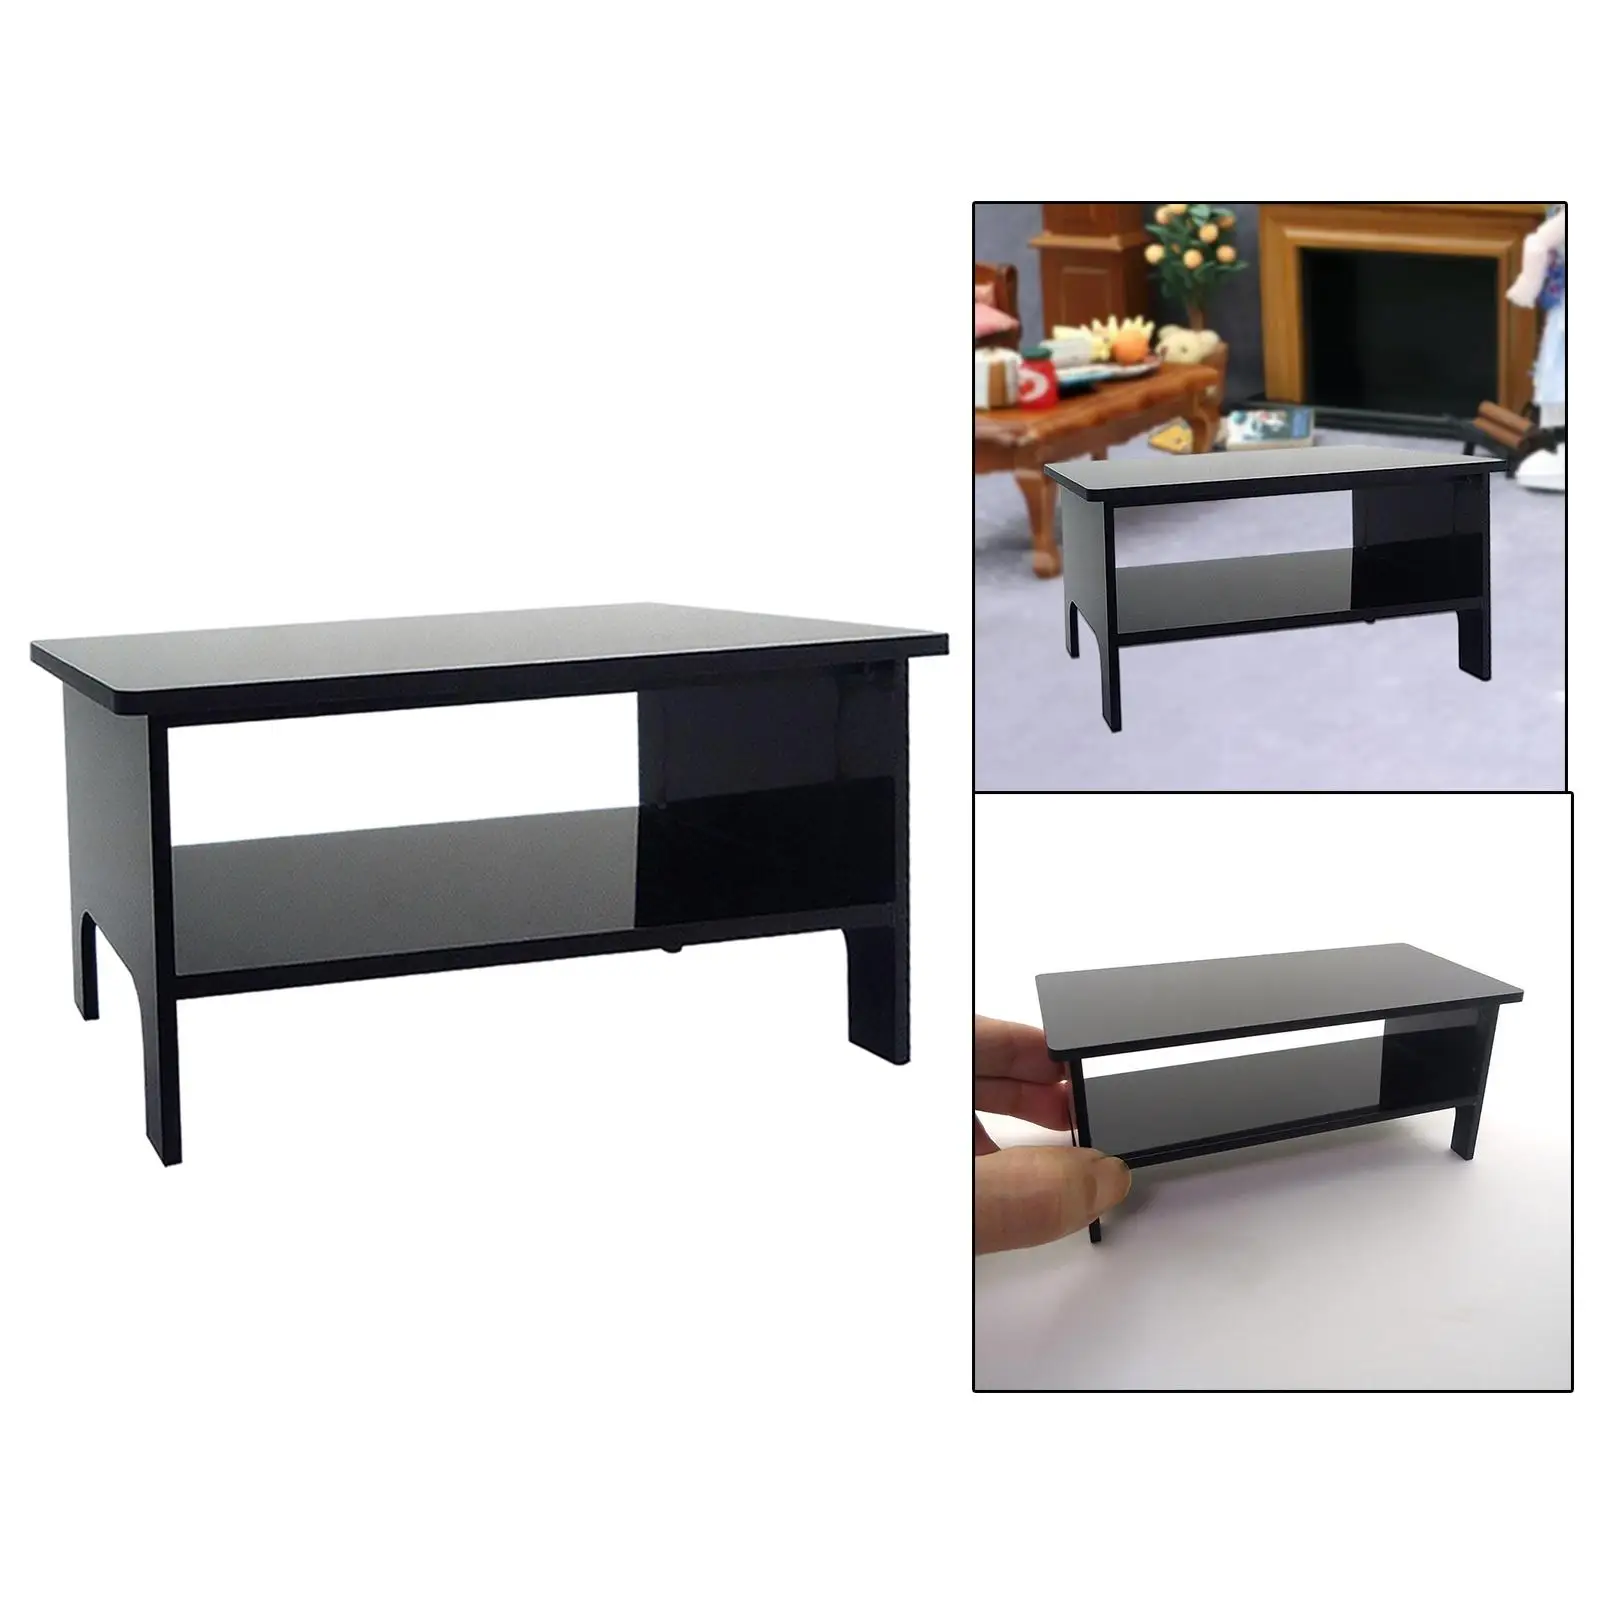 Acrylic Dollhouse Coffee Table Furniture Model for Doll House Decoration